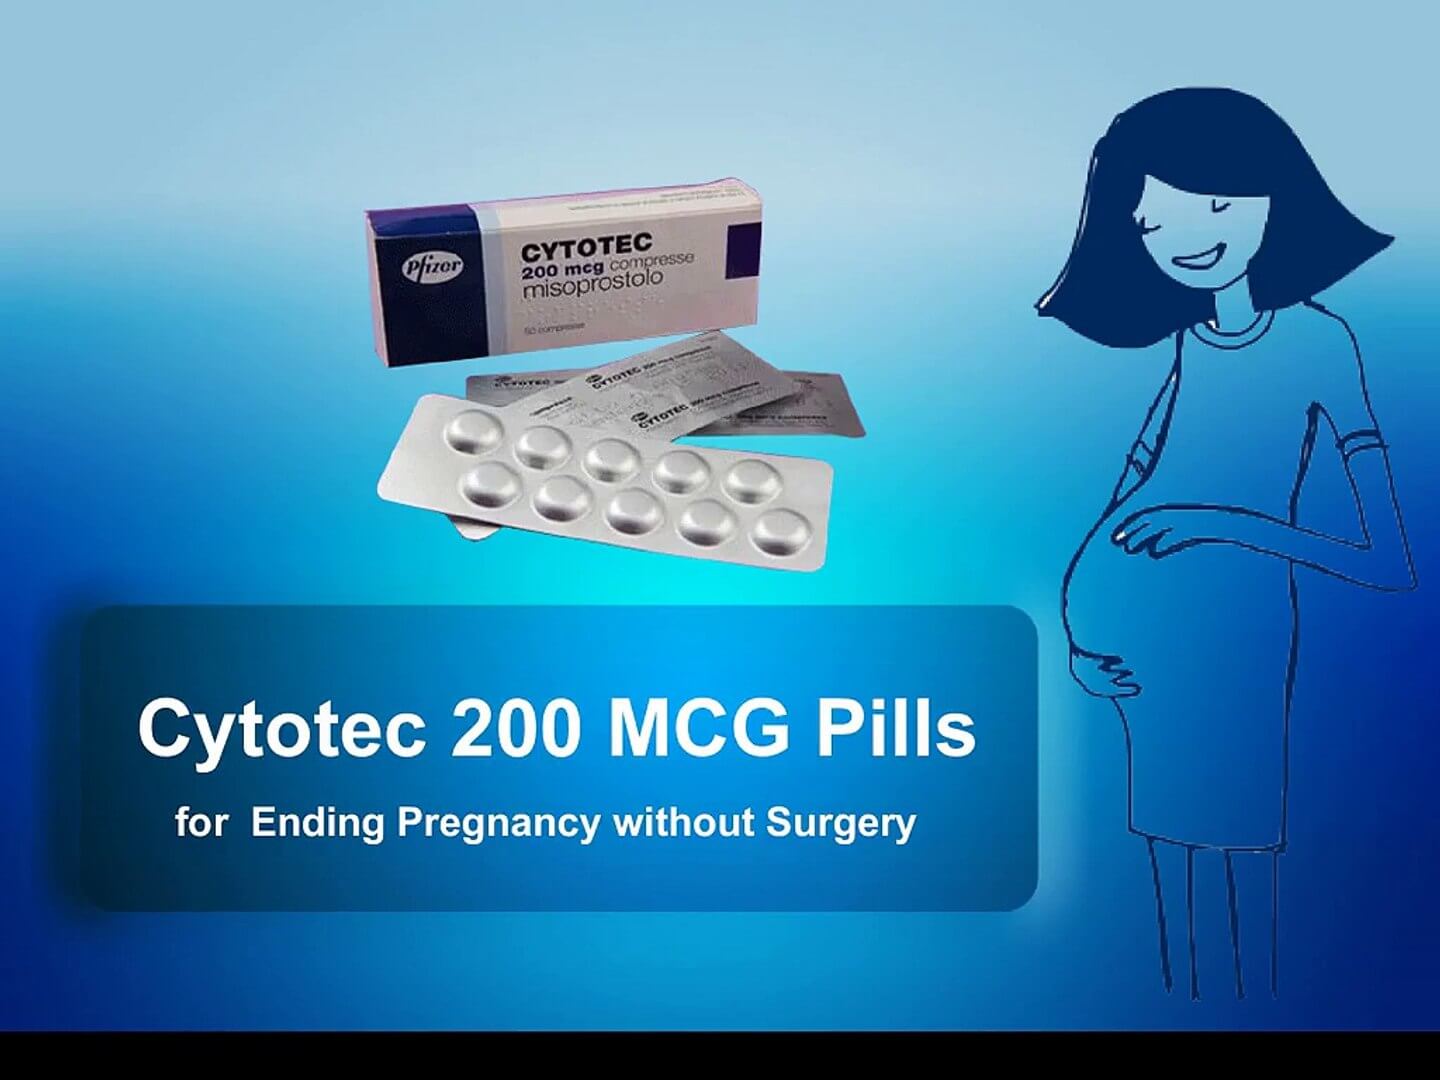 Know more about Cytotec pills used to terminate pregnancy